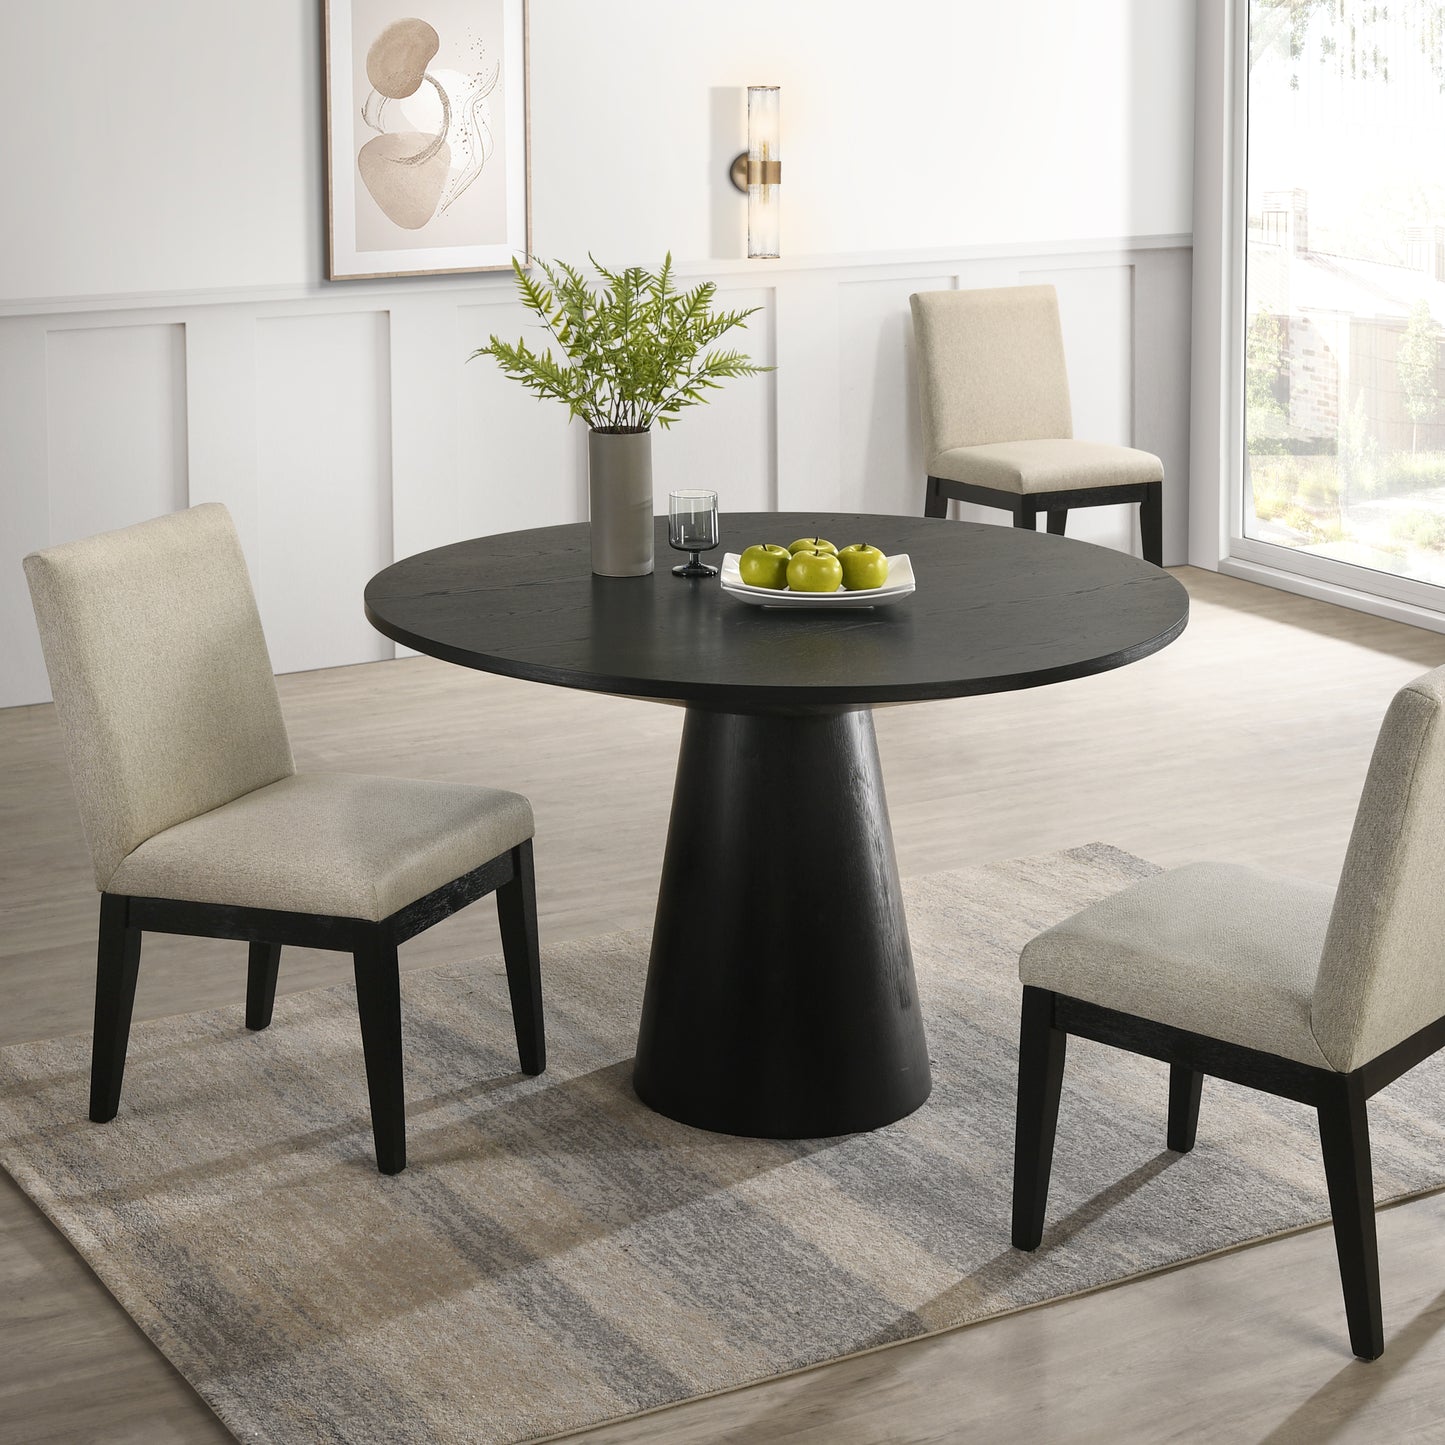 Roundhill Furniture Rocco Contemporary Pedestal Dining Table, Ebony